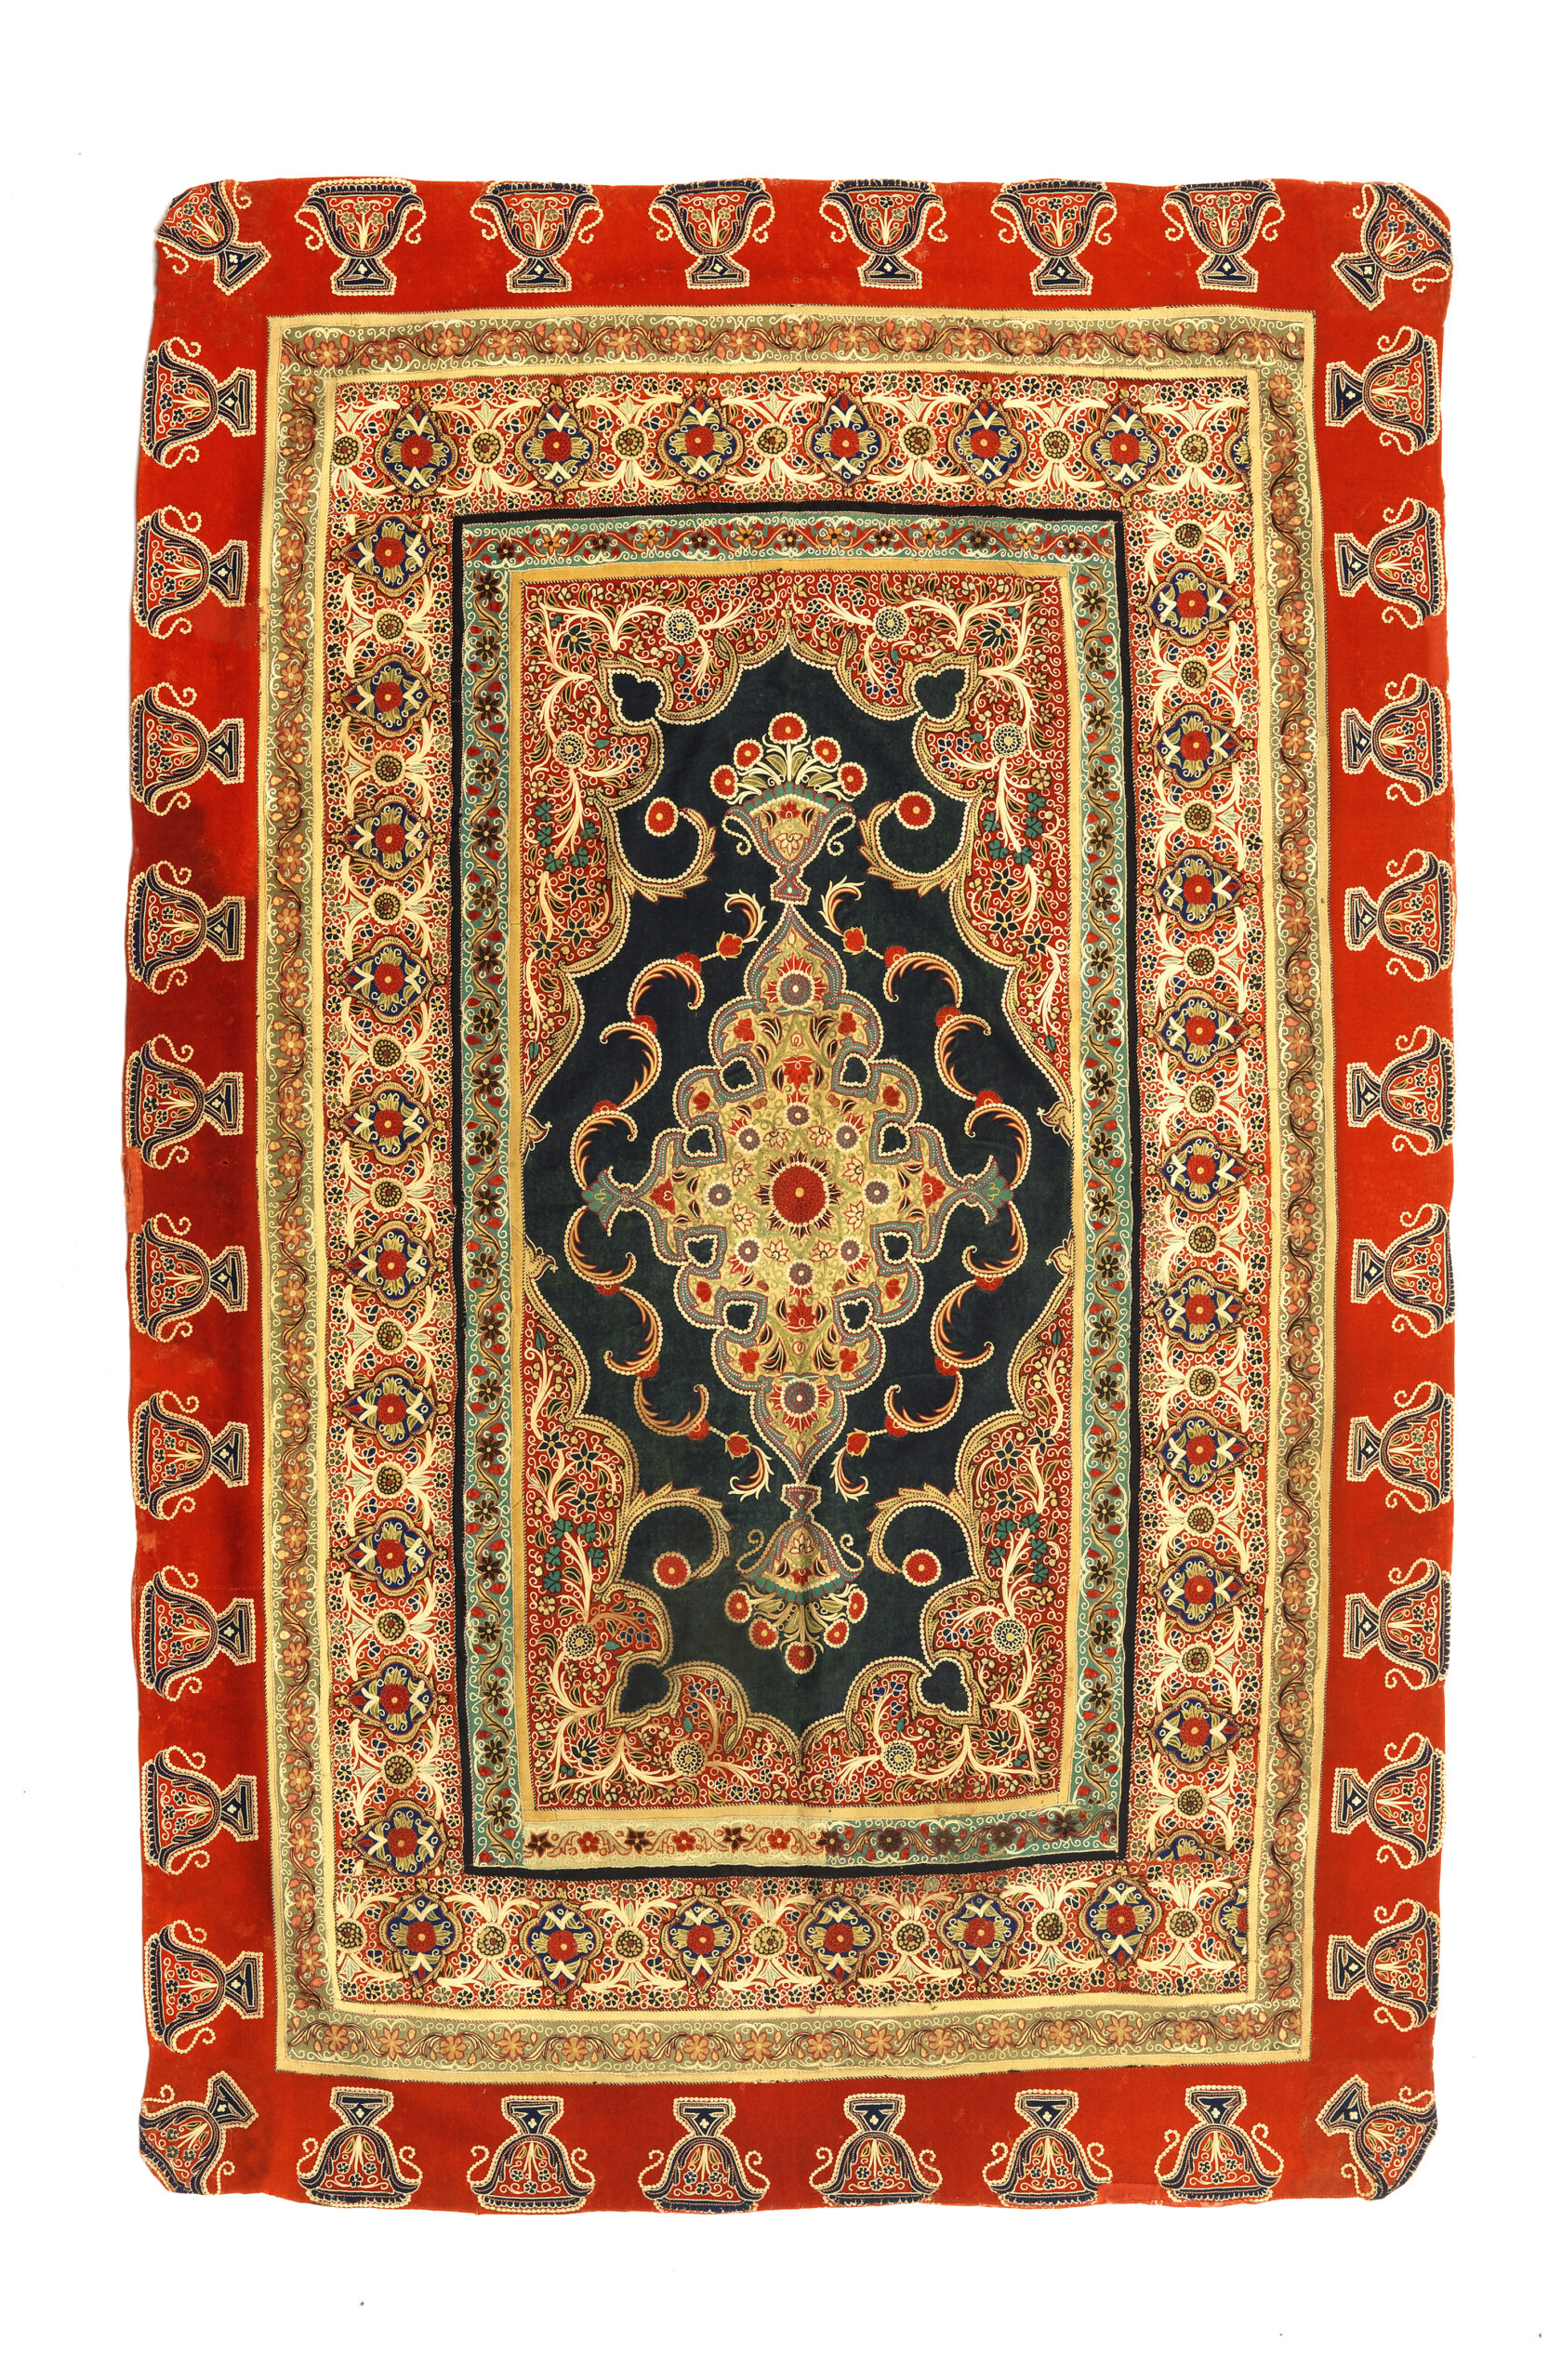 4 Cover, Rasht, late 19th century. Rasht-duzi patchwork, red, blue and yellow wool flannel embroidered in fine stitches with flower and foliage medallions and borders